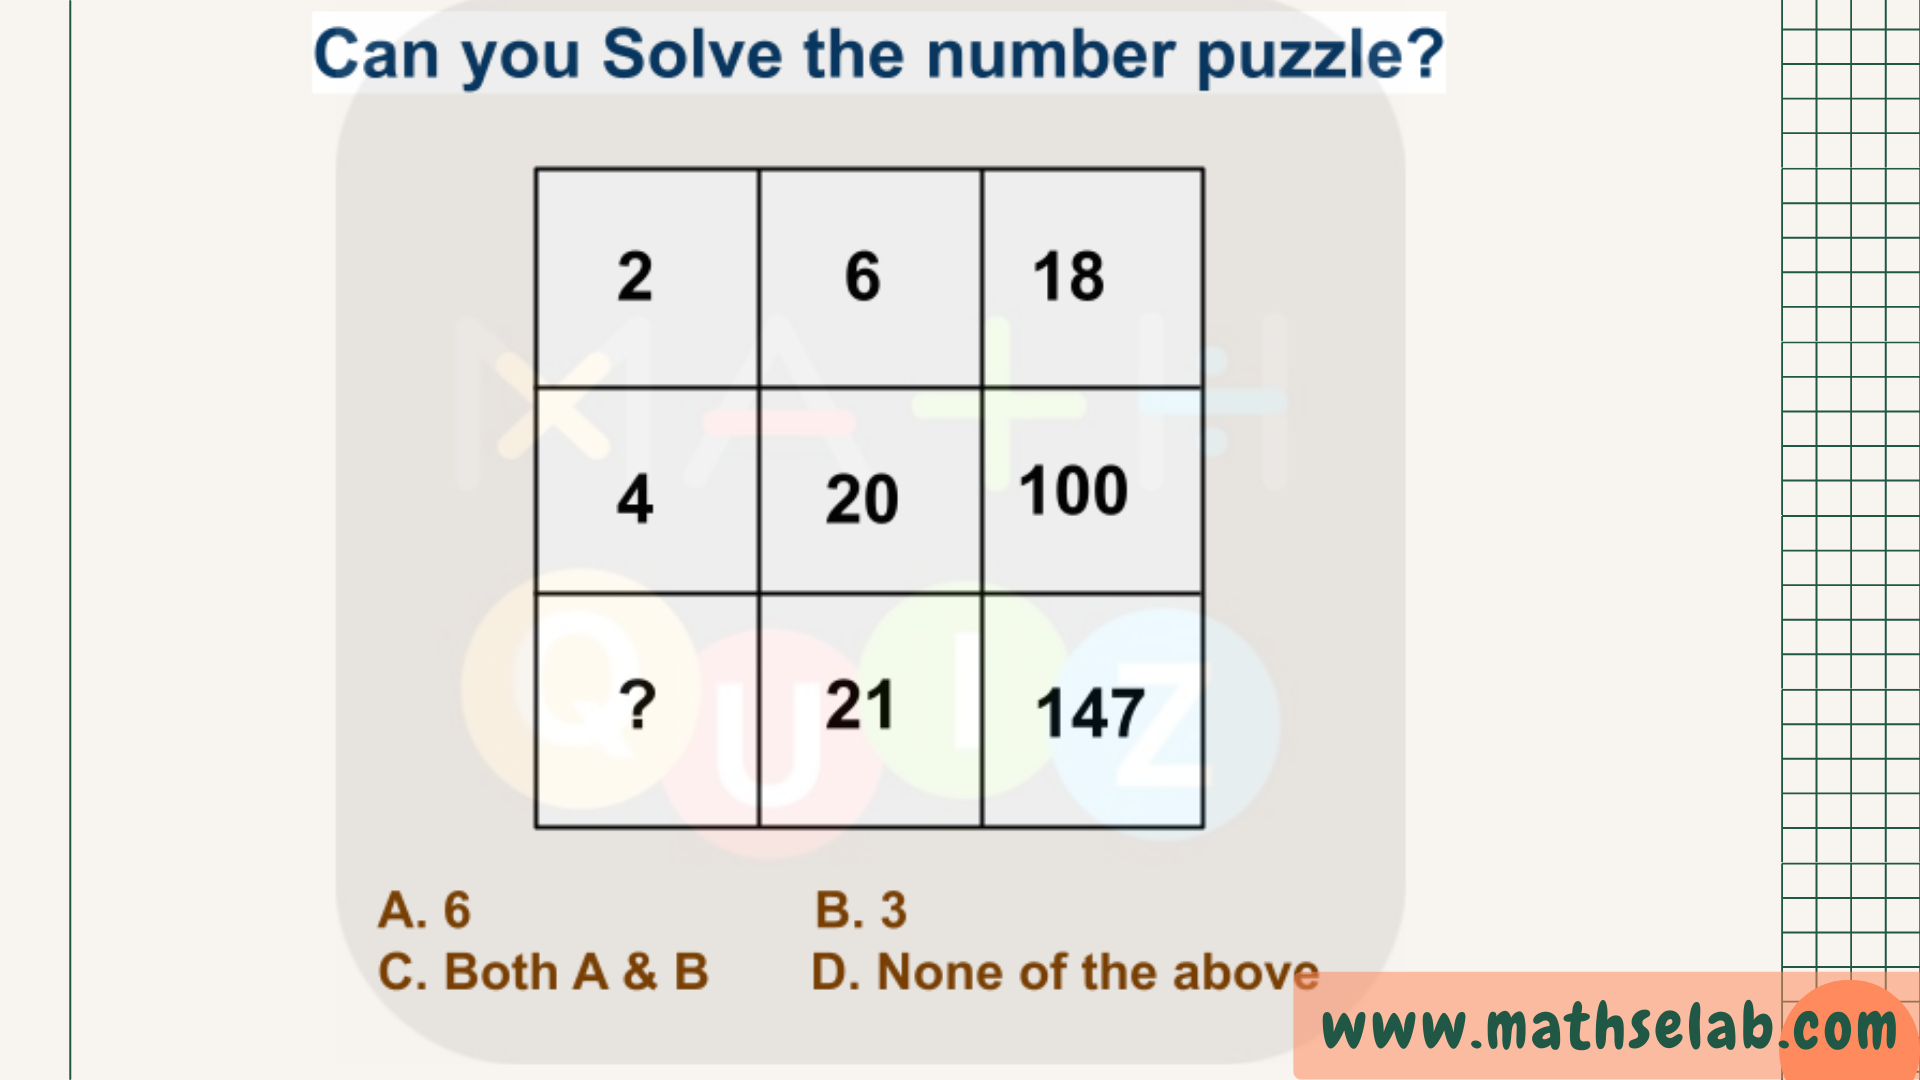 Can you solve the missing number - www.mathselab.com